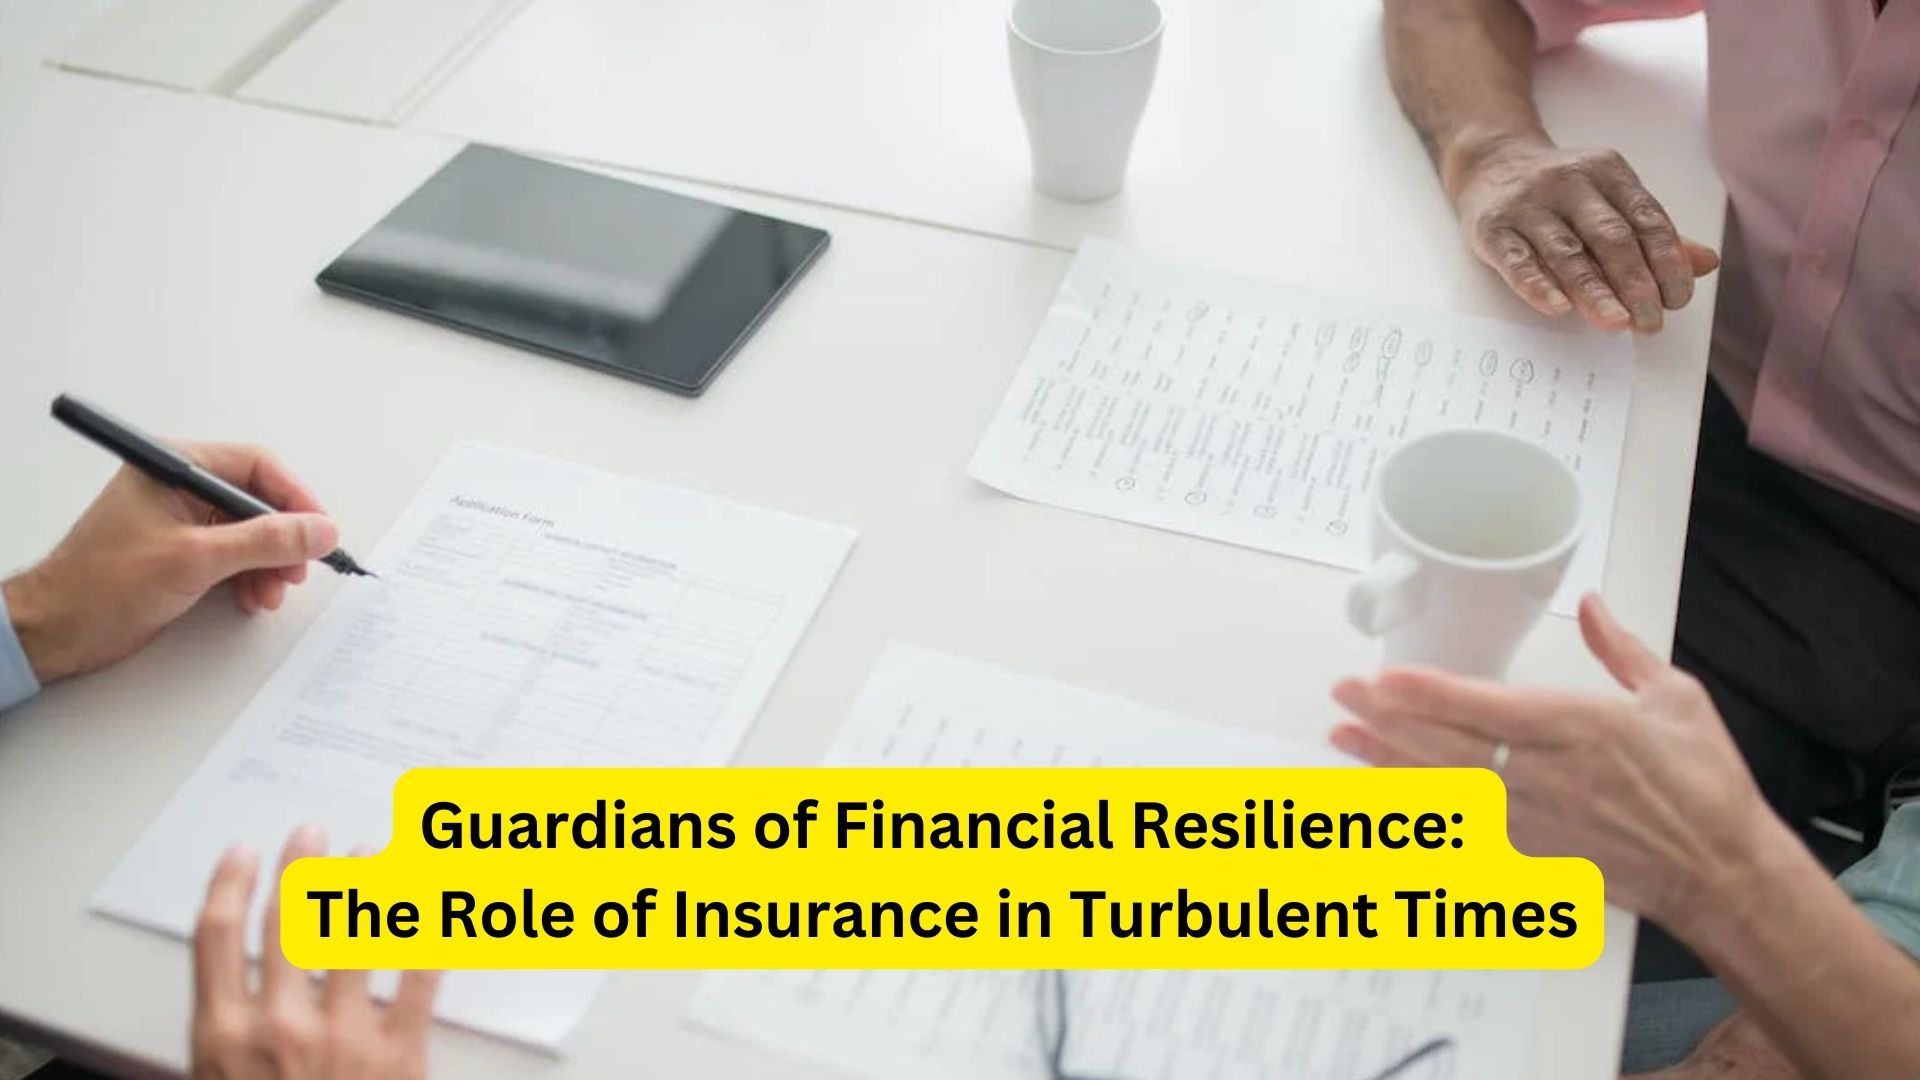 Guardians of Financial Resilience: The Role of Insurance in Turbulent Times